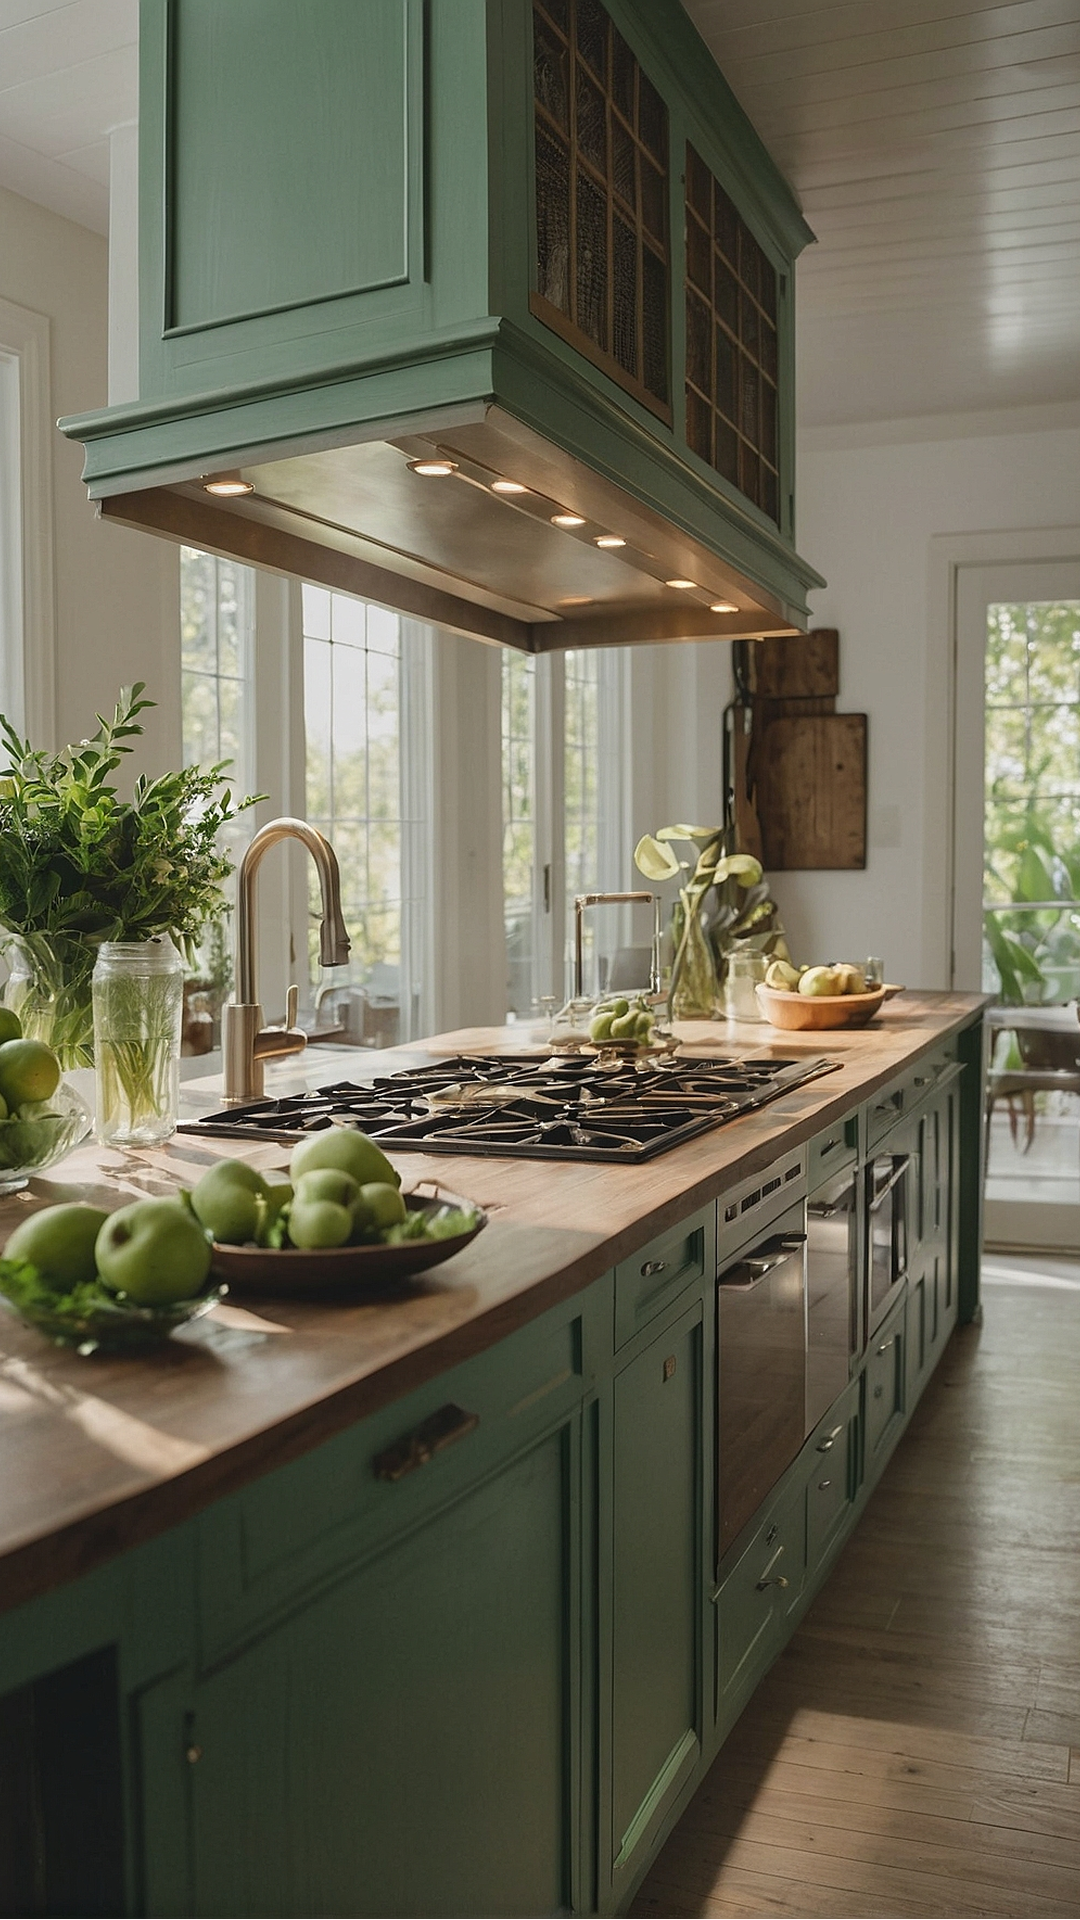 Lush and Relaxing: Green Kitchen Ambiance